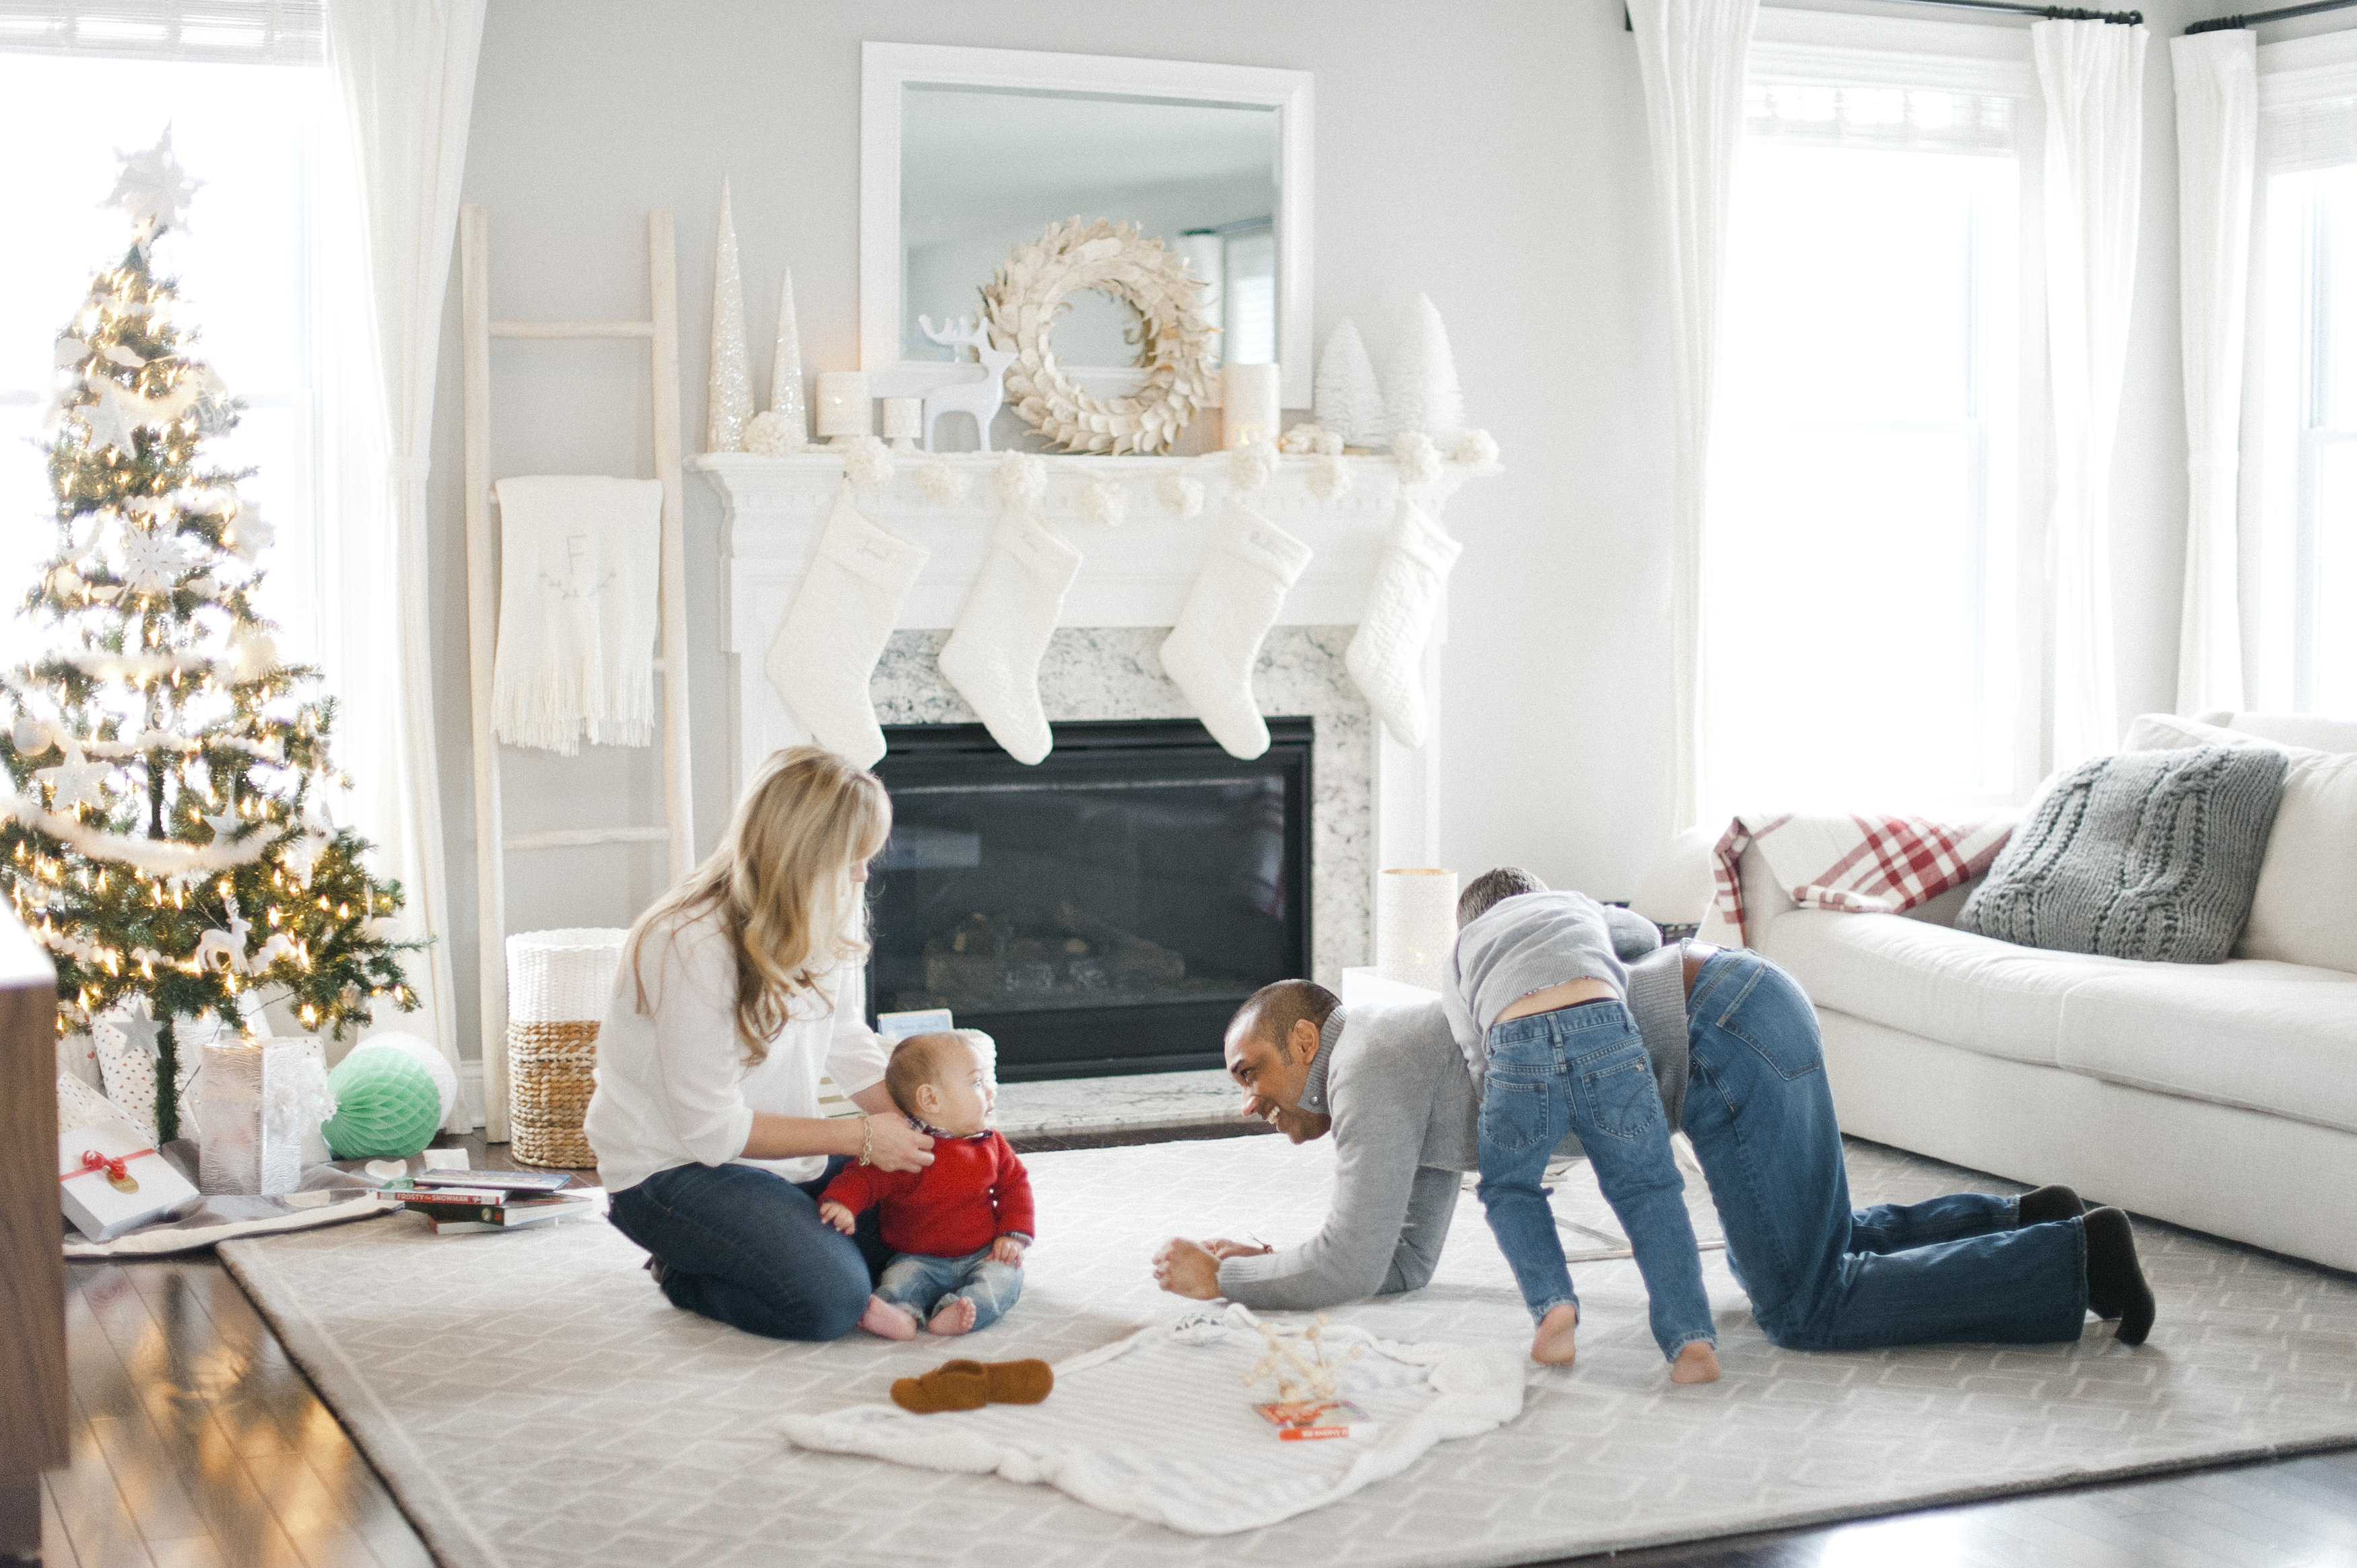 family lifestyle at home – family activities, home indoors